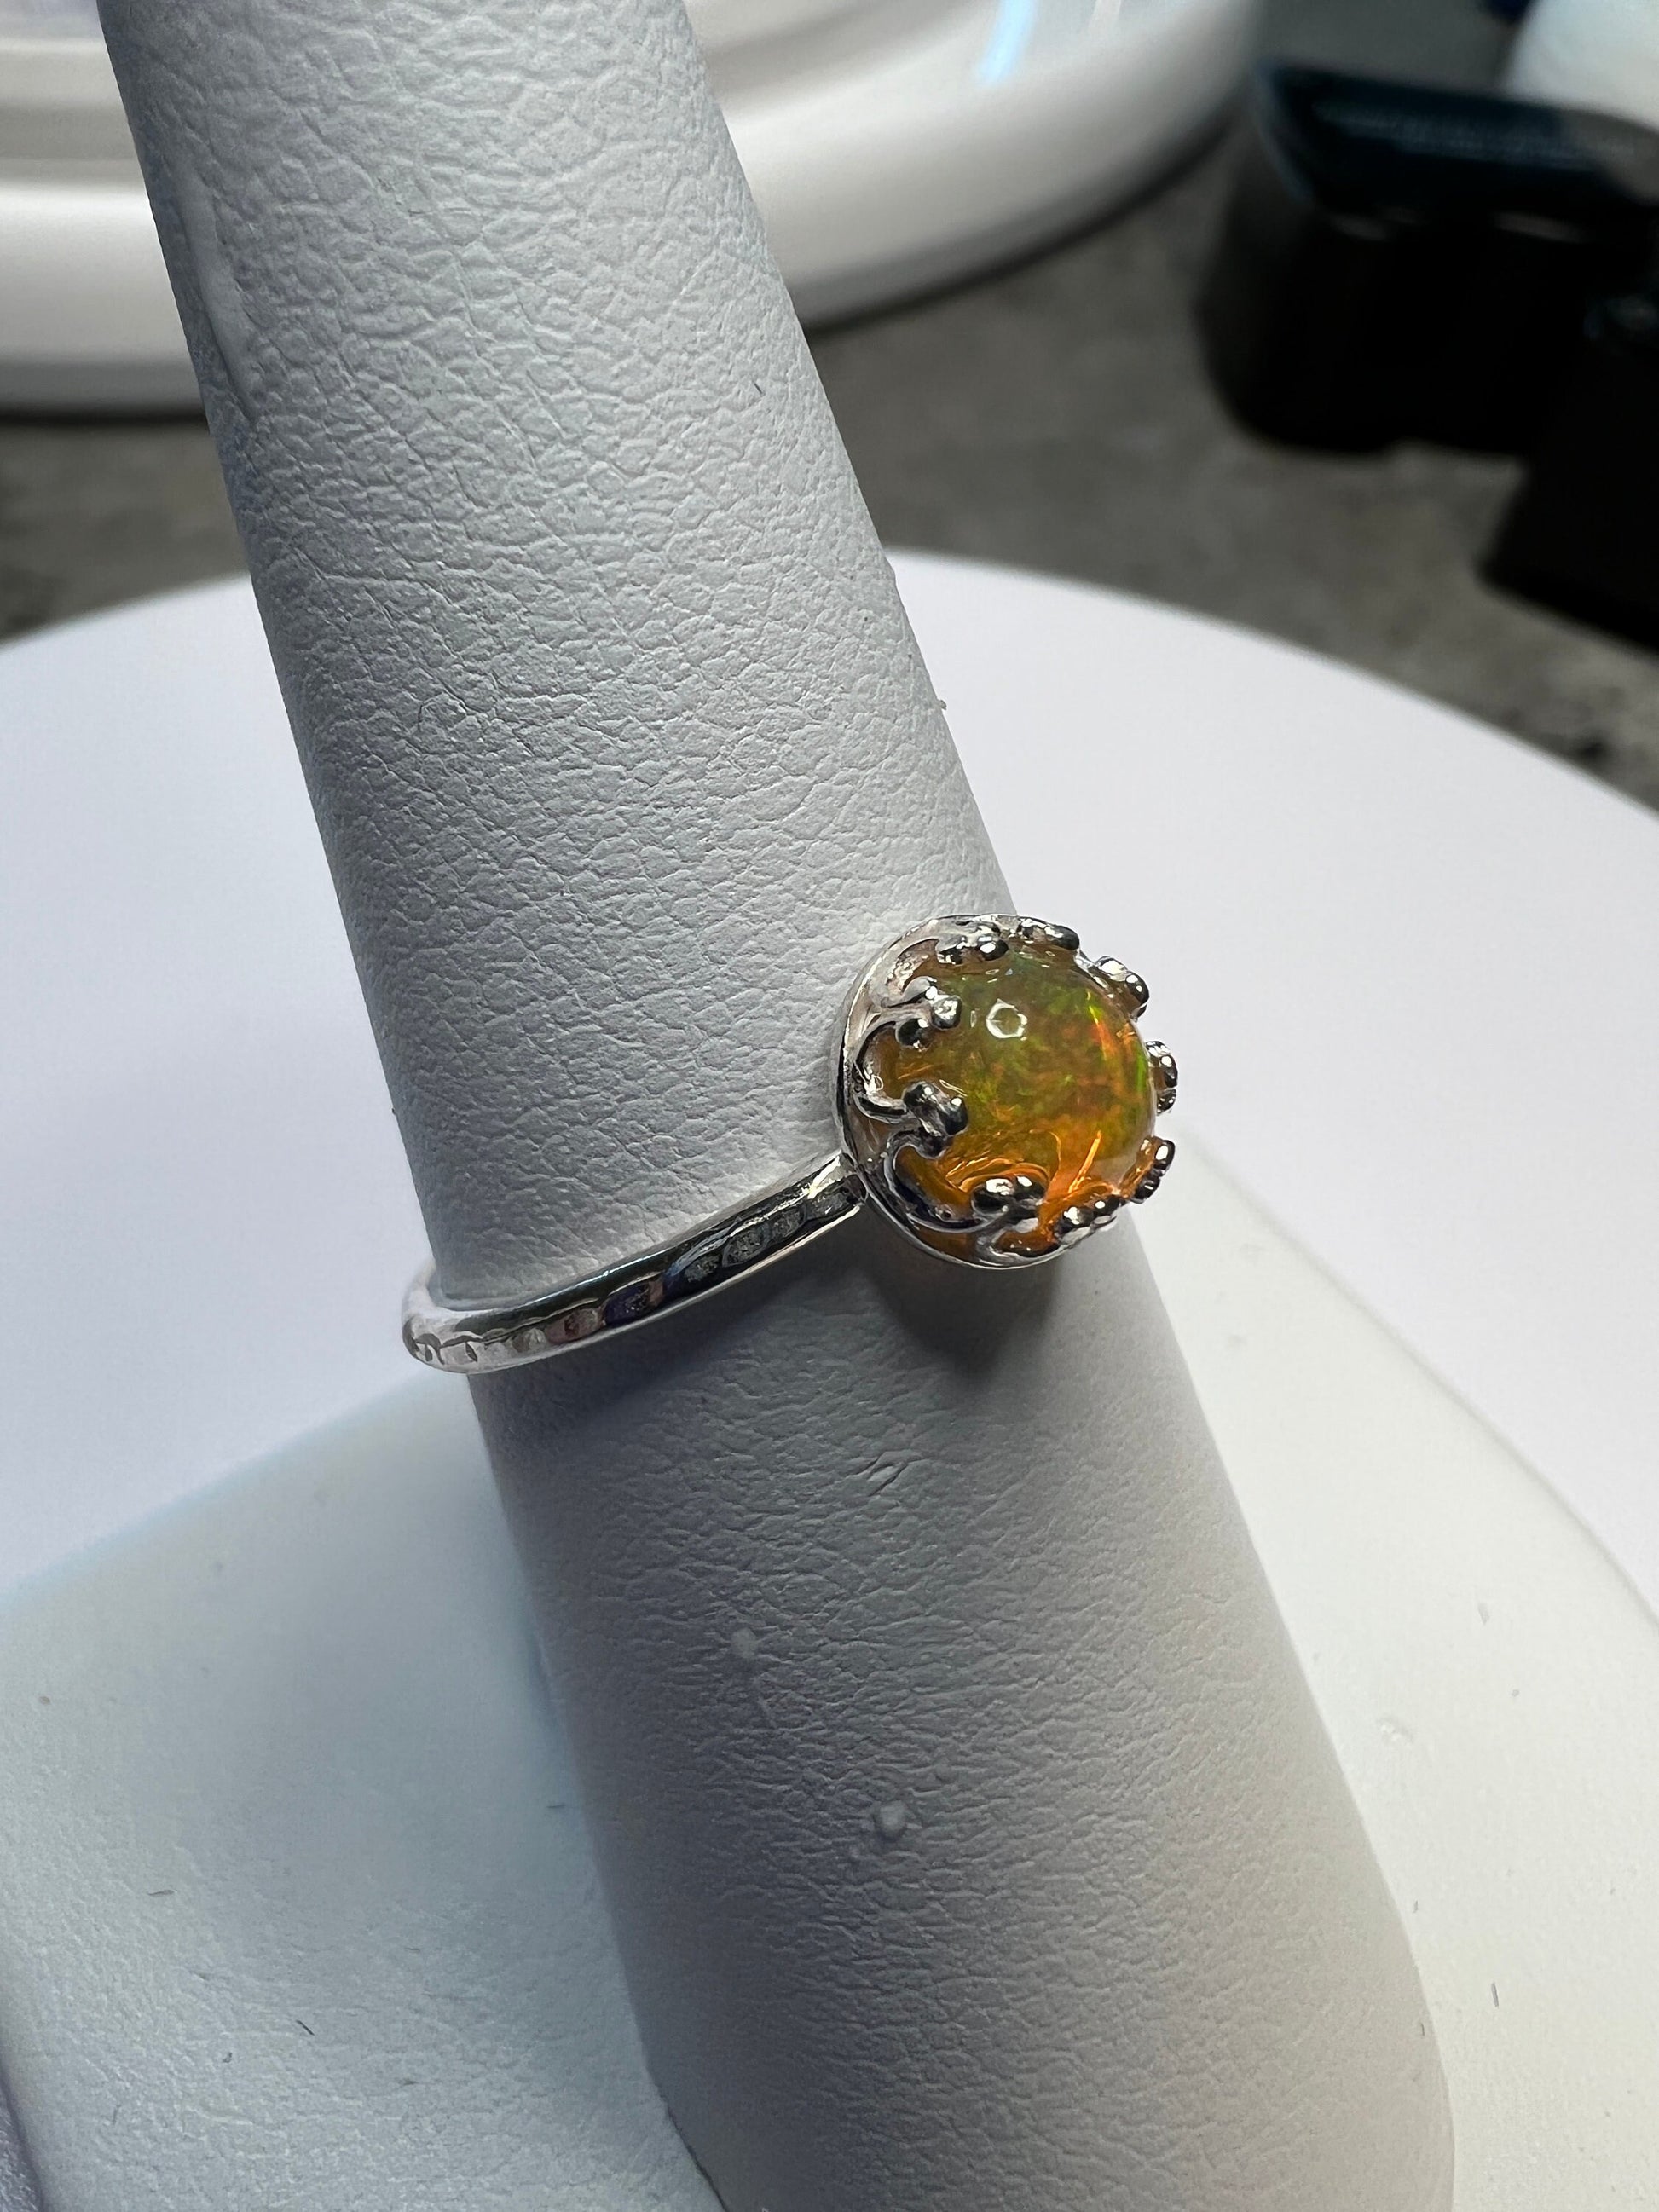 Unique AAA Quality Ethiopian Opal Ring in Sterling Silver - Great Play of Color!